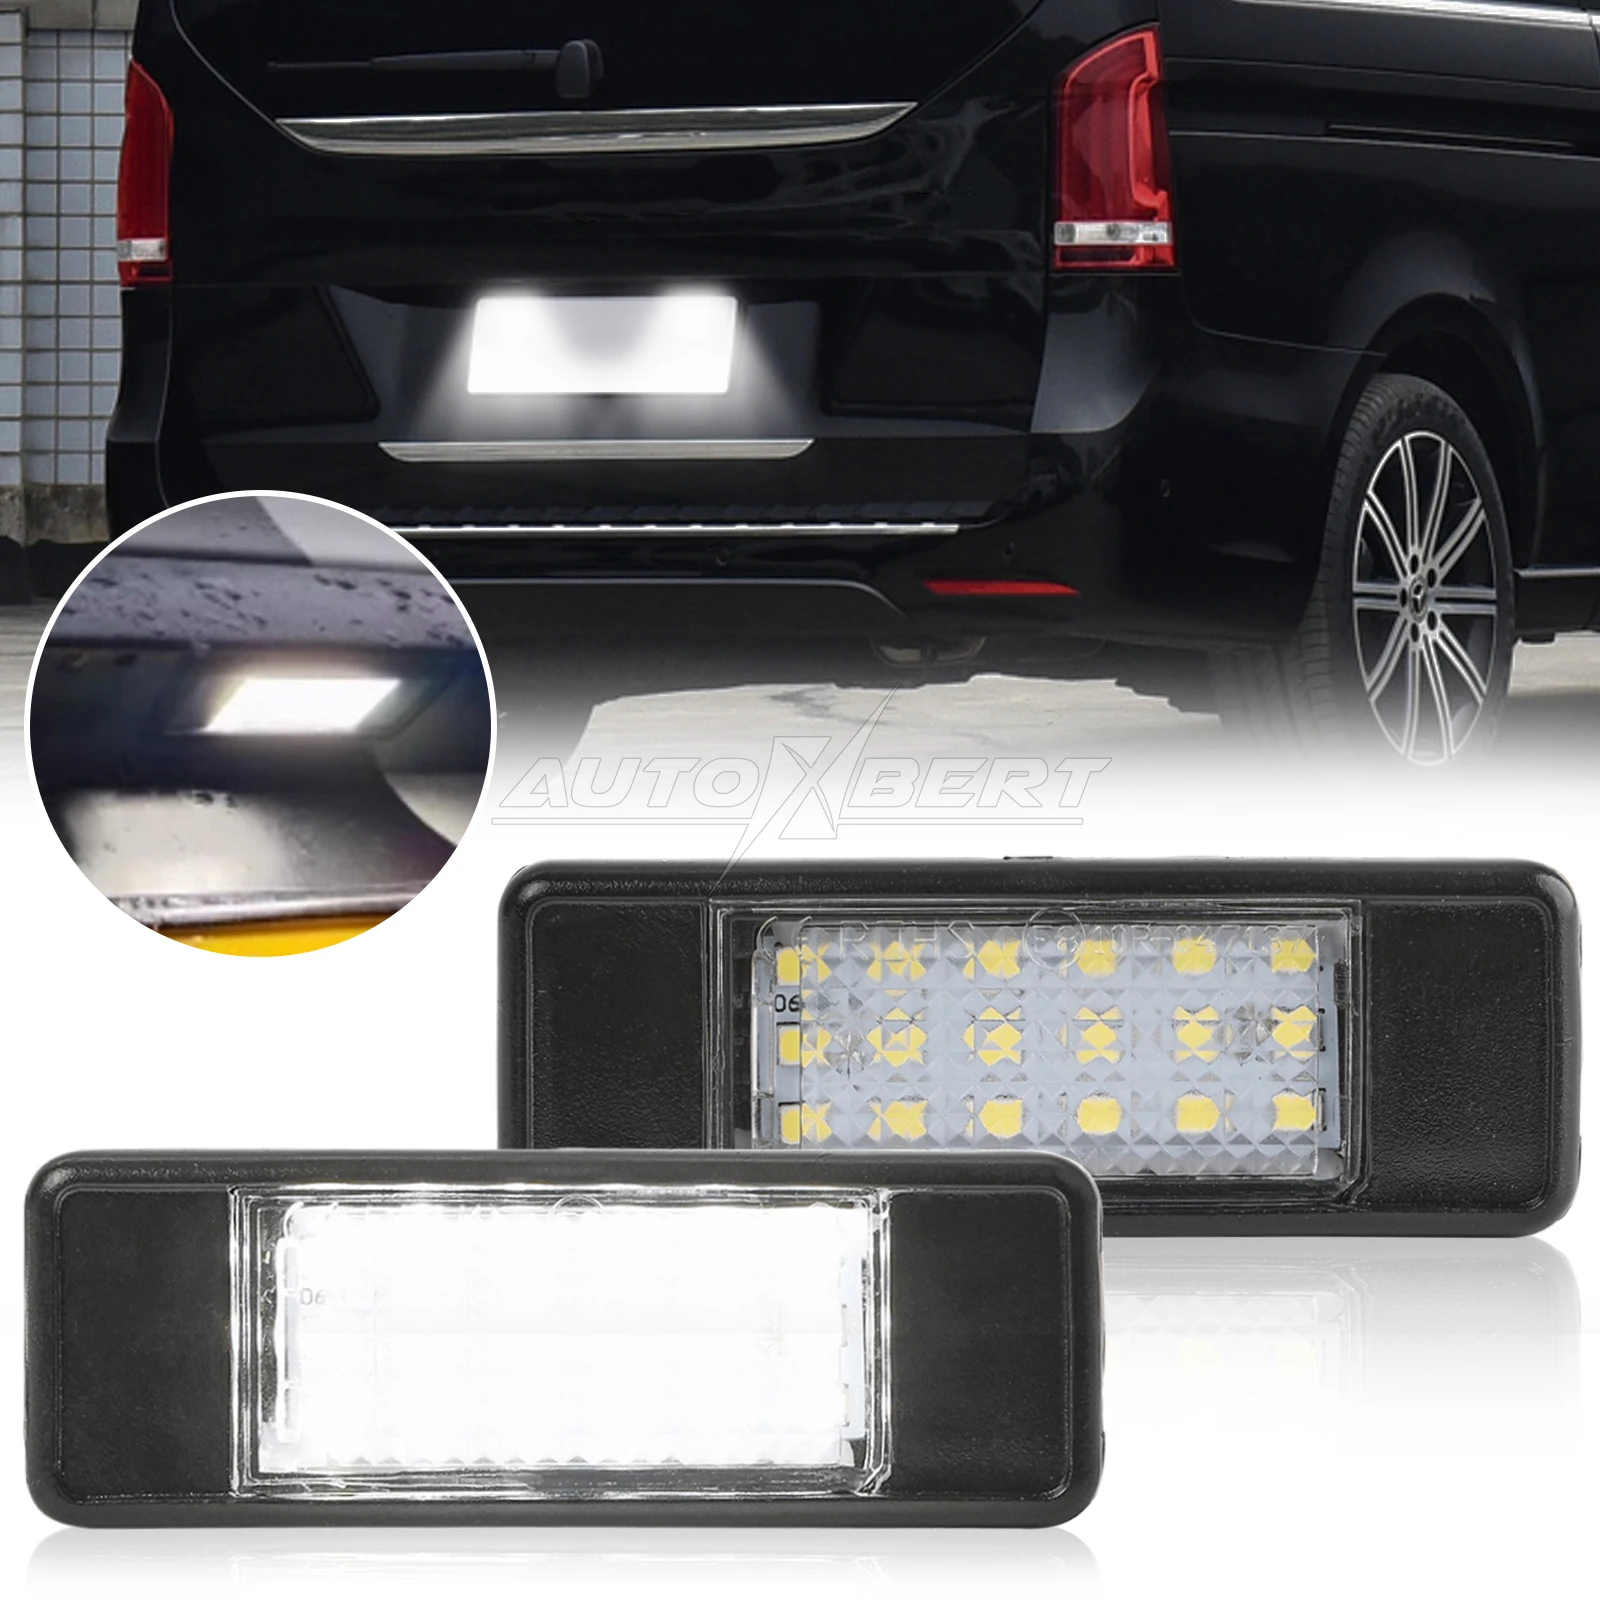 

2Pcs Error Free LED License Plate Light Number Plate Lamp For Mercedes-Benz Vito Viano W639 2003-2014 Sprinter W906 2006-2018